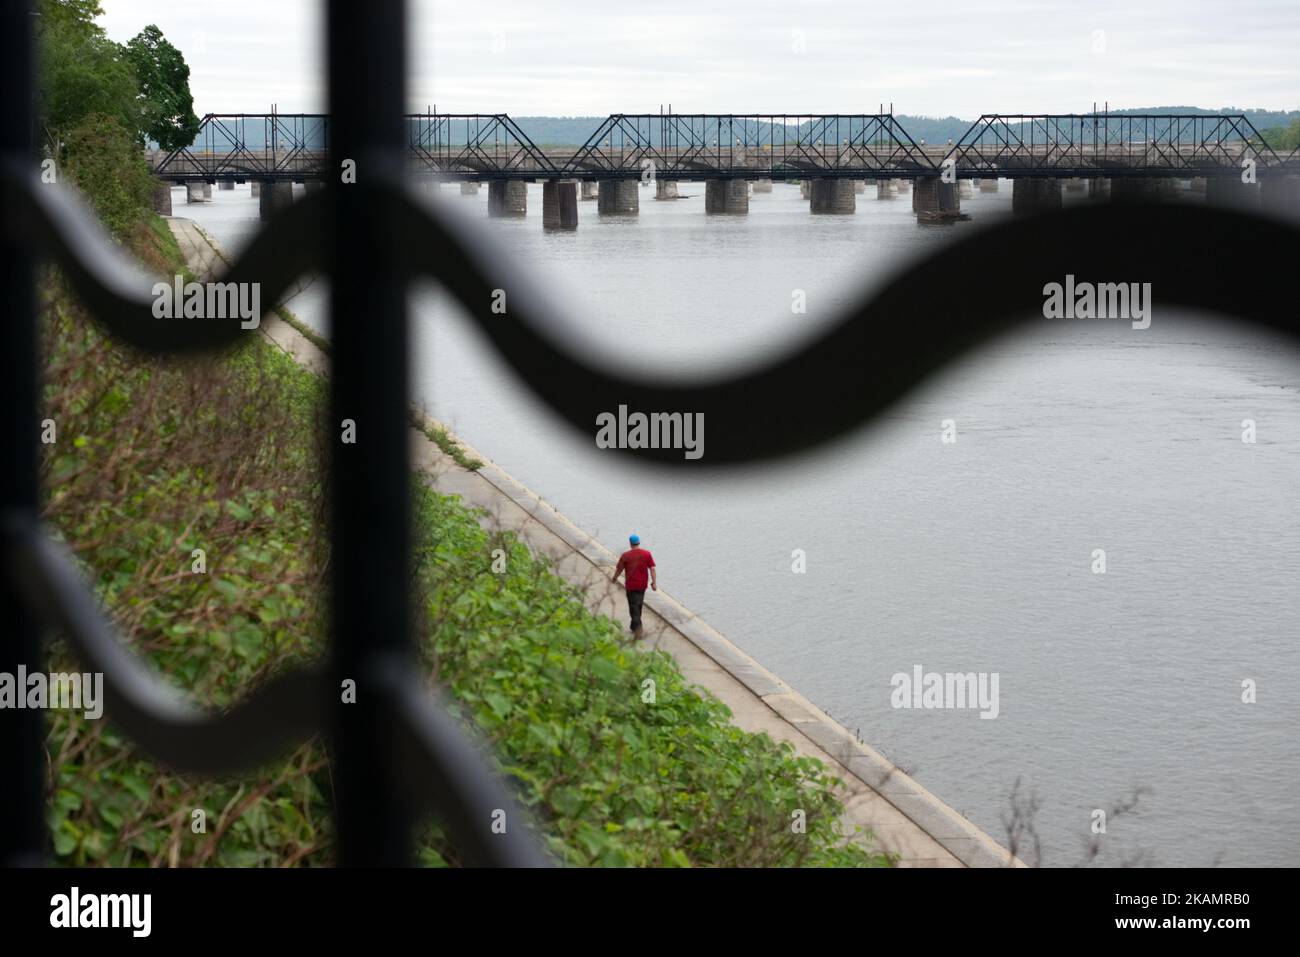 A man walks along the Susquehanna River, in Harrisburg, PA, on the morning of April 30, 2017. Diminishing retail, crumbling infrastructure, environmental issues, poverty and unemployment are shown in a view on the current state of a section of rural America on day 101 of Trump's Presidency. The Keystone state Pennsylvania formed an important factor in Trump's victory in the 2016 US elections. (Photo by Bastiaan Slabbers/NurPhoto) *** Please Use Credit from Credit Field *** Stock Photo